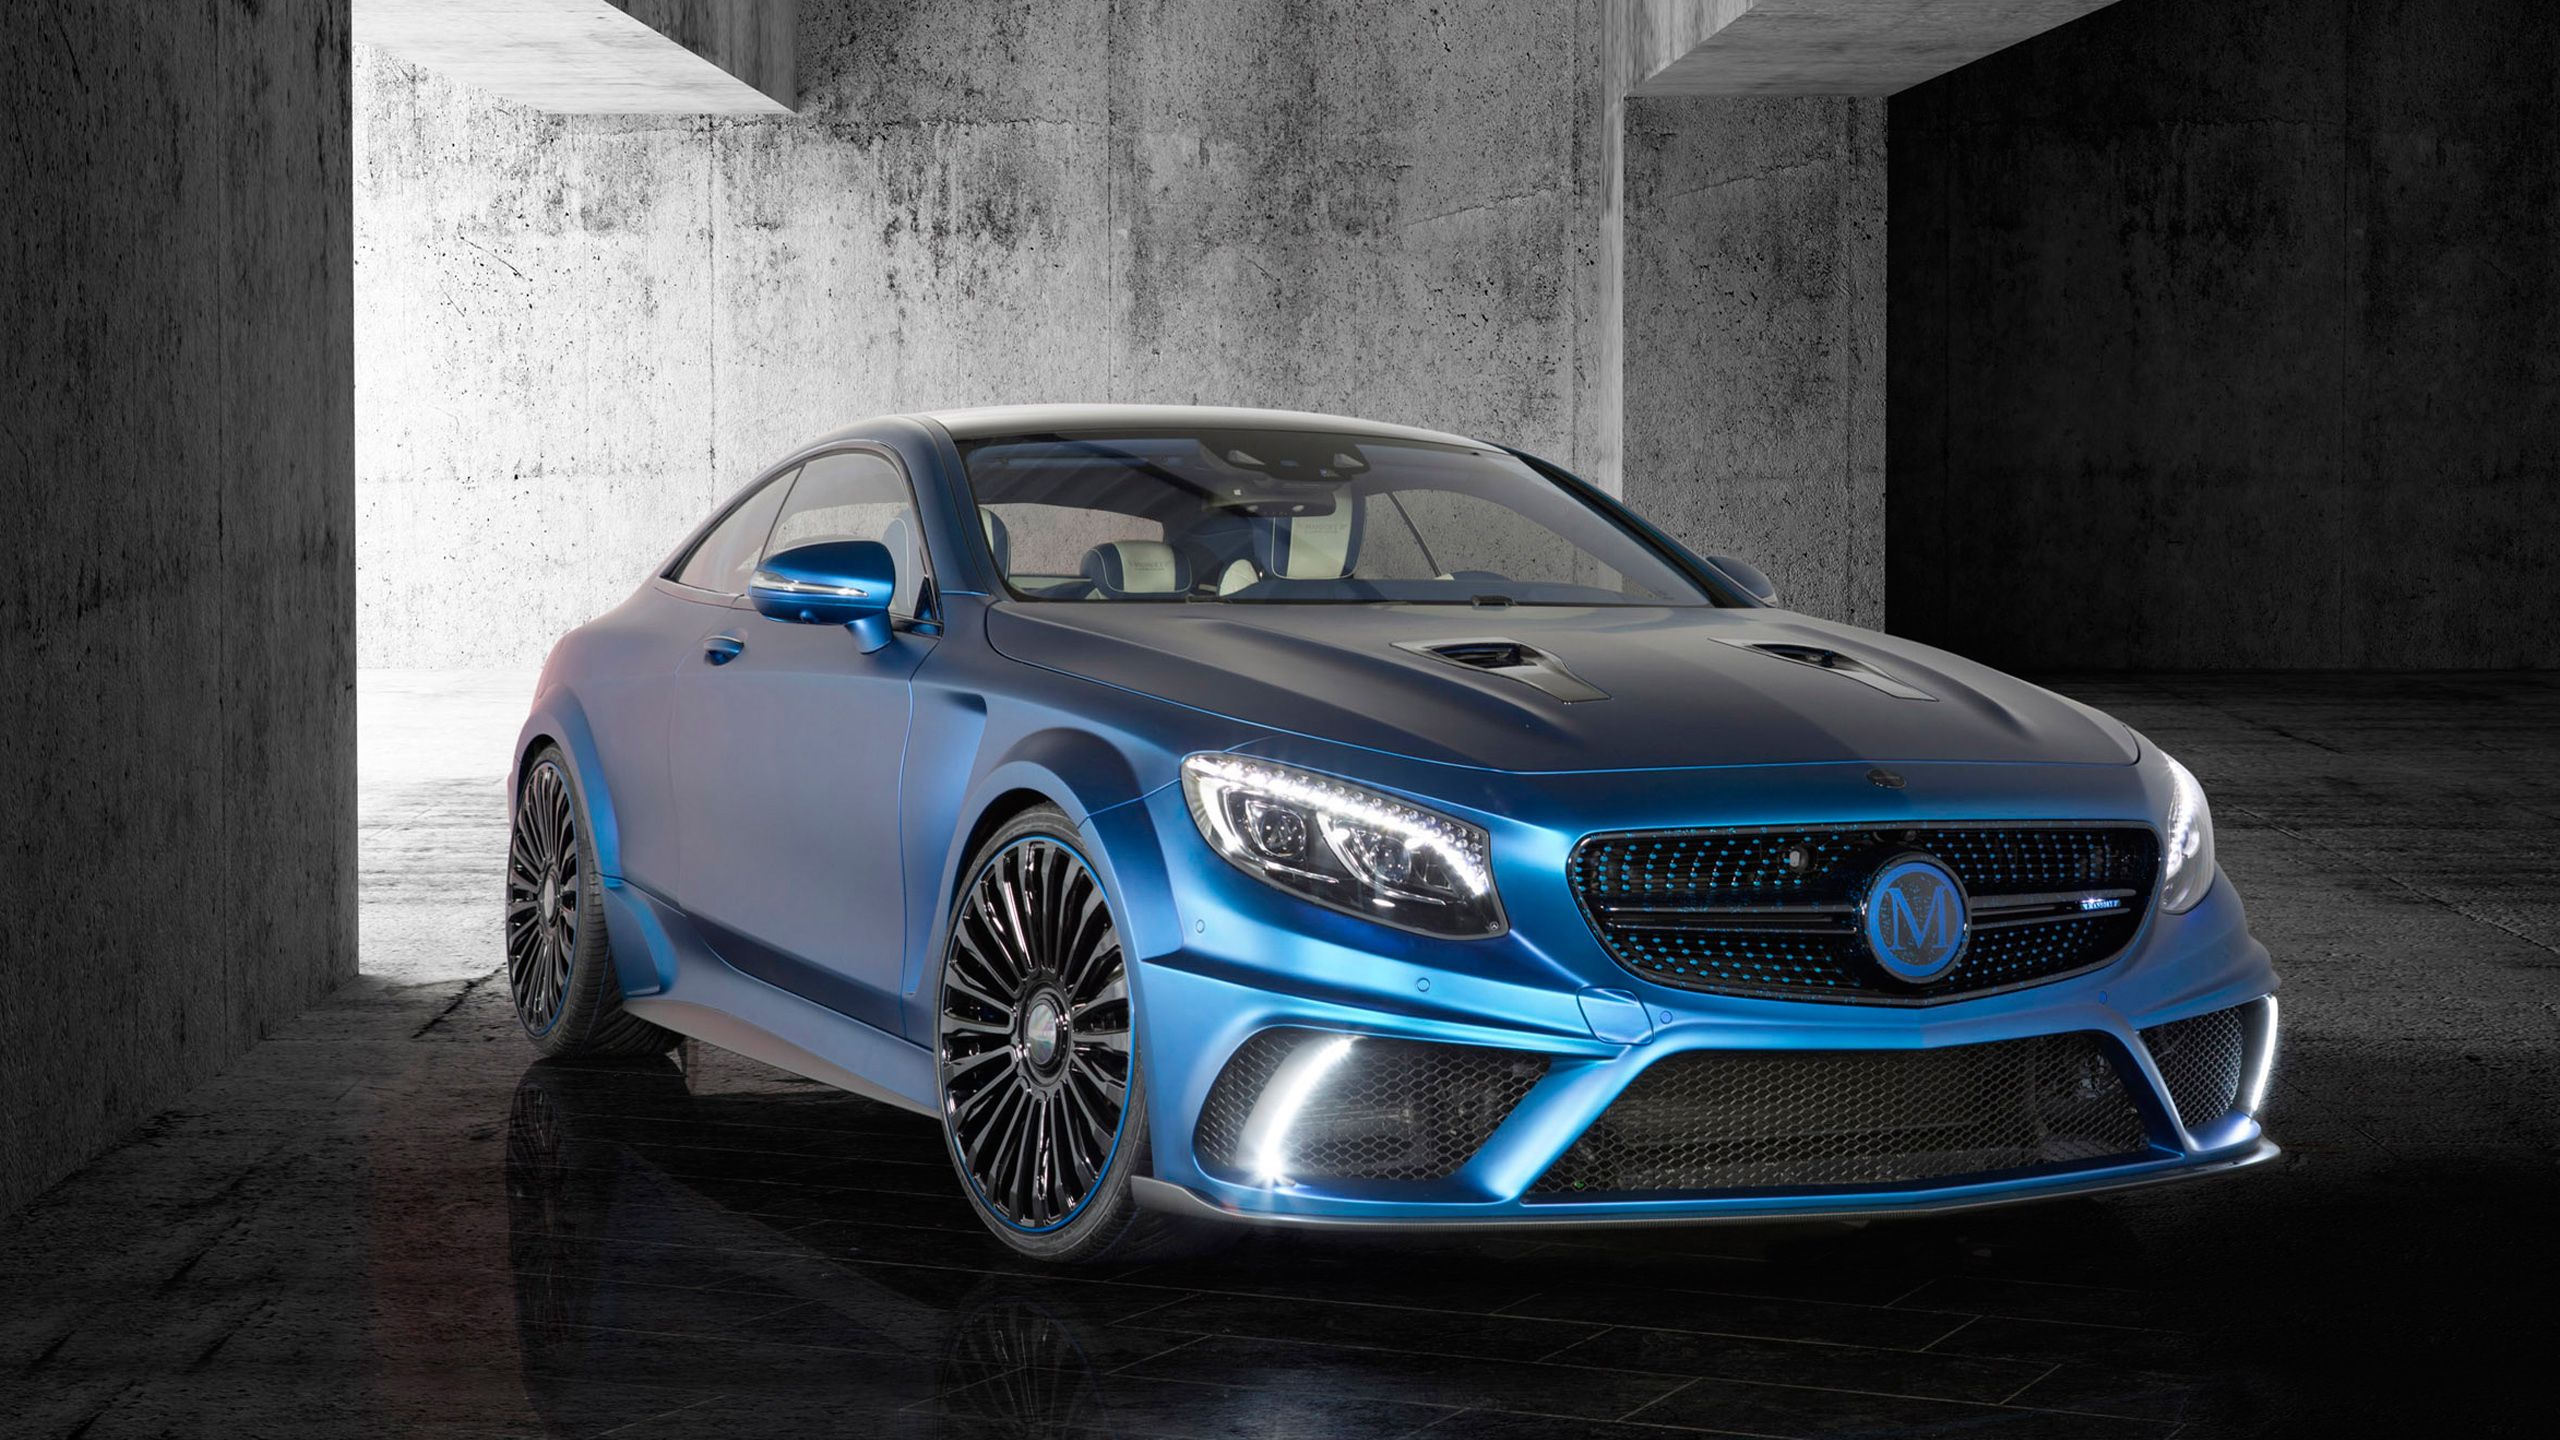 Mansory Mercedes Benz S63 AMG Coupe Diamond Edition Wallpaper